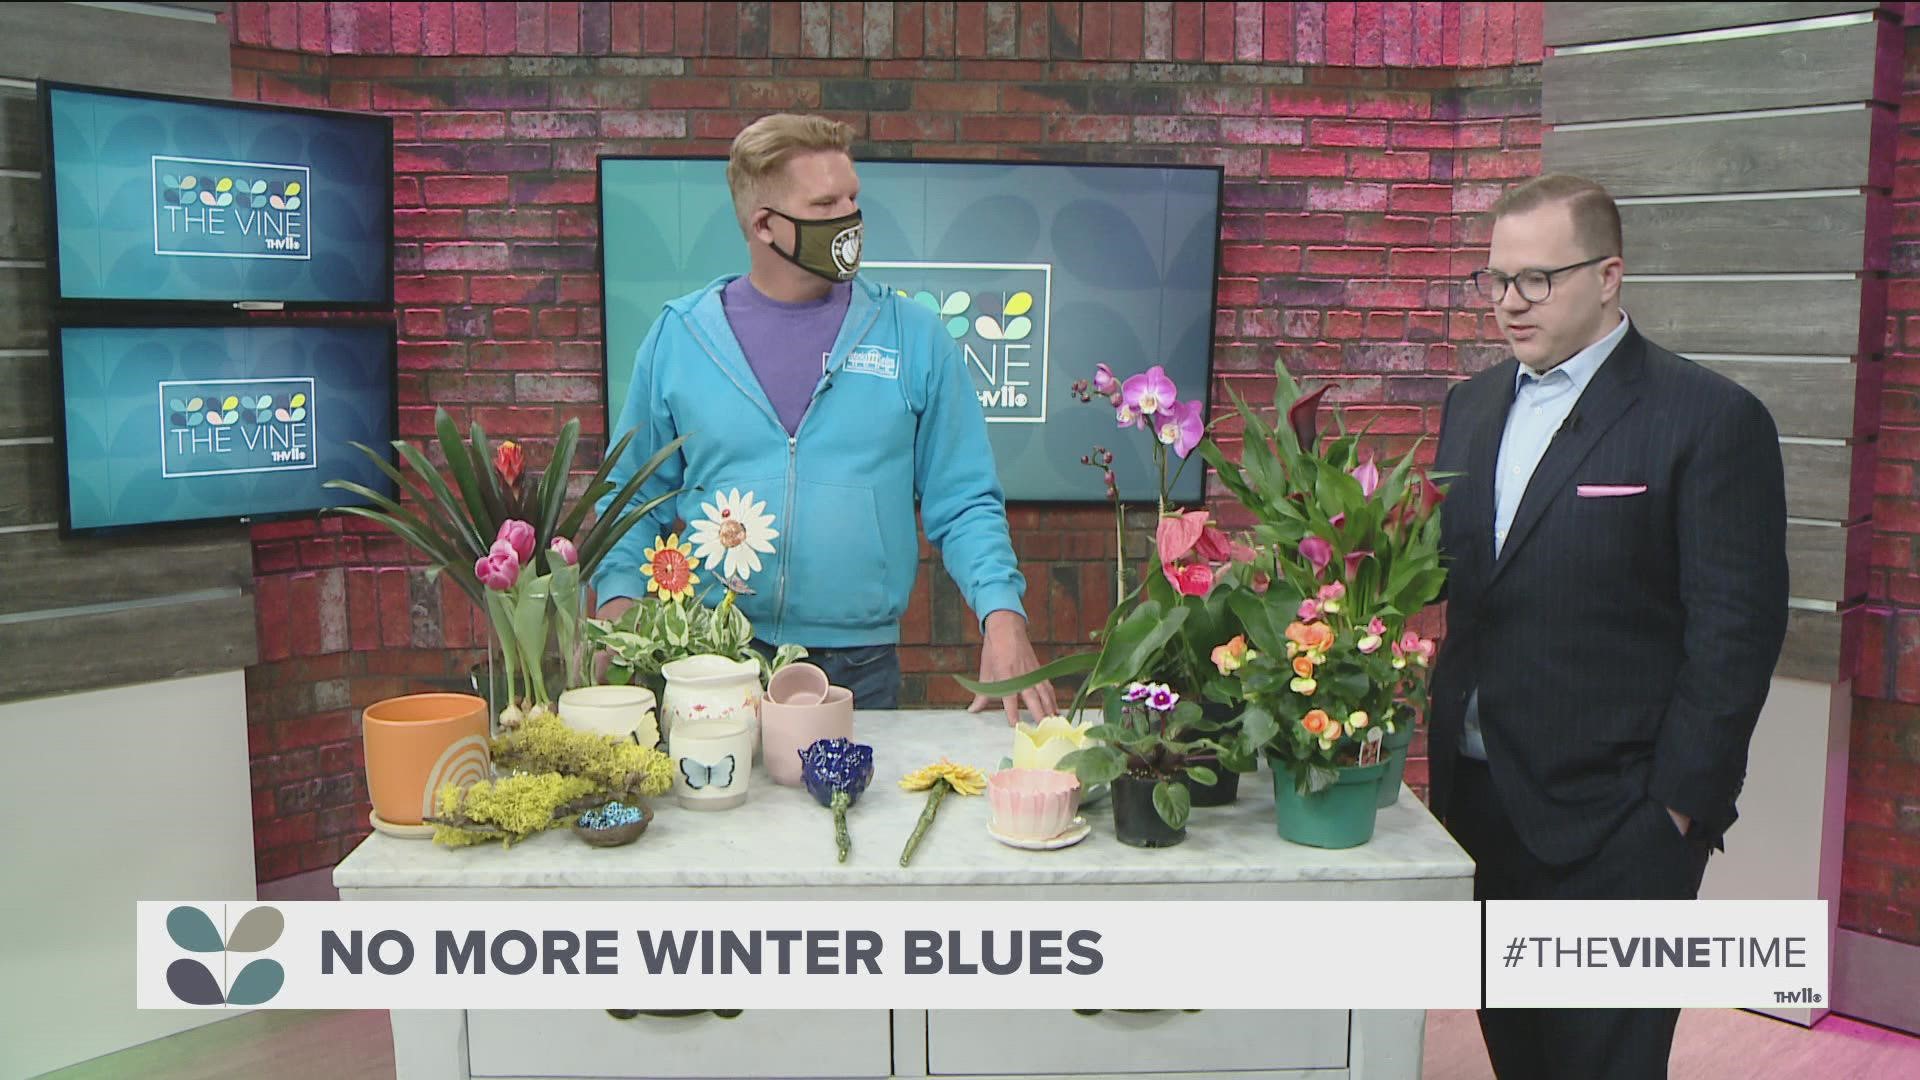 Chris H. Olsen is helping us get rid of the Winter blues with plants that give our home a boost of color.